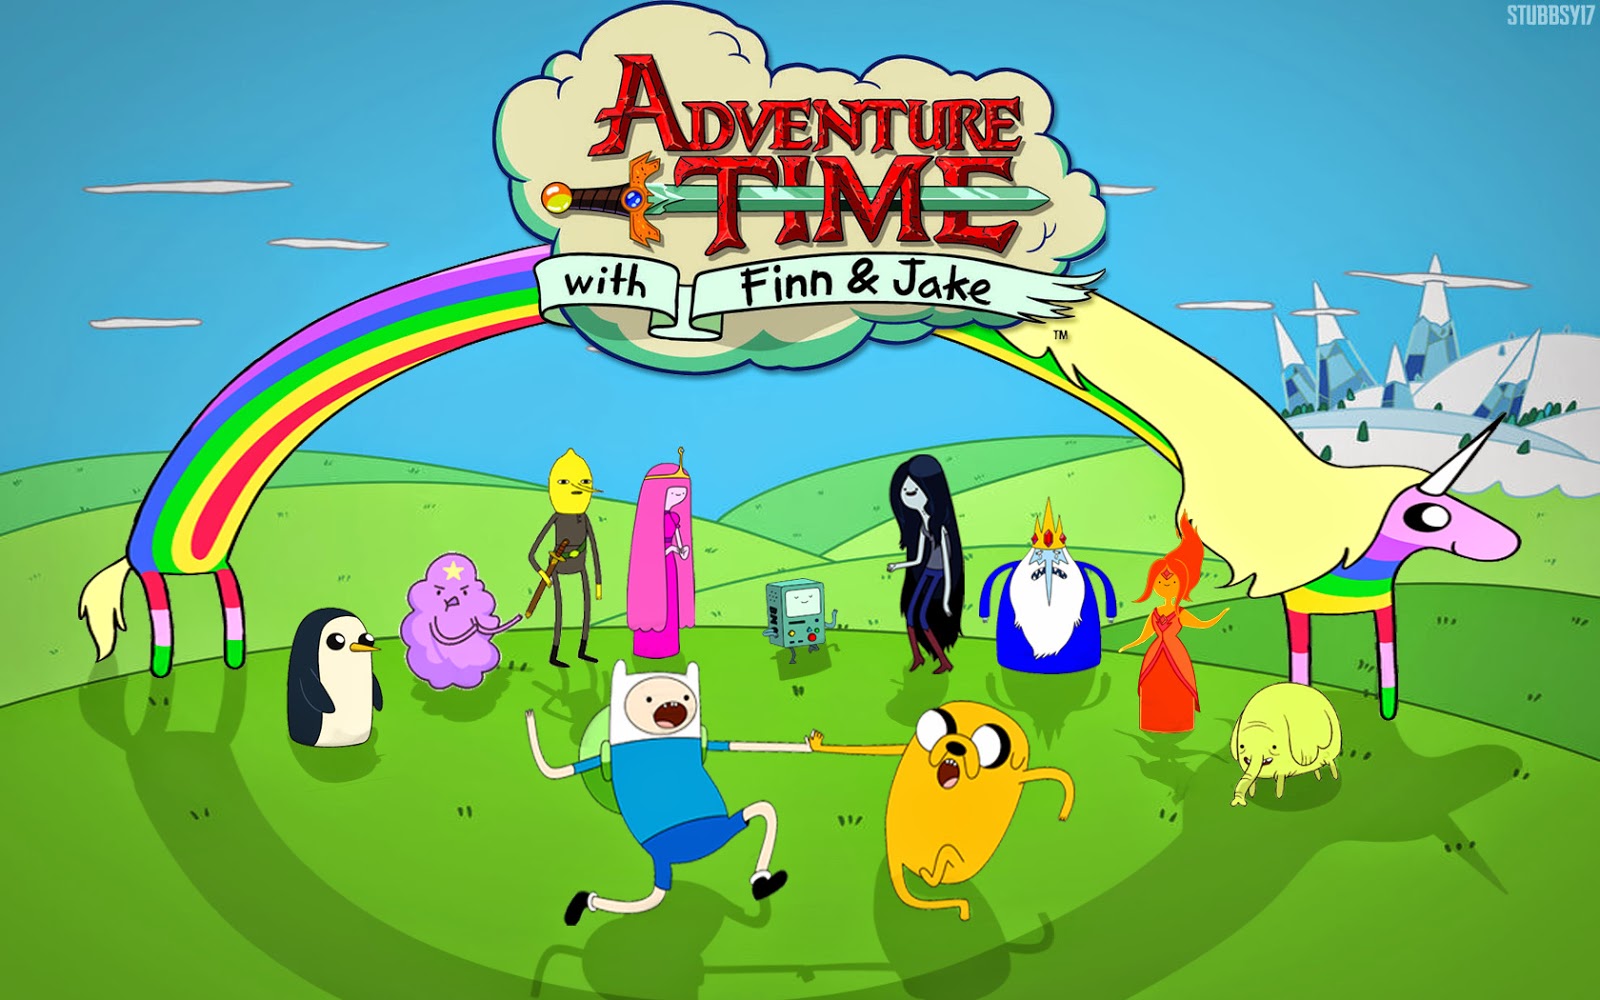 Adventure Time Animation Gif Wallpaper Hd With Fun - Adventure Time Animation , HD Wallpaper & Backgrounds